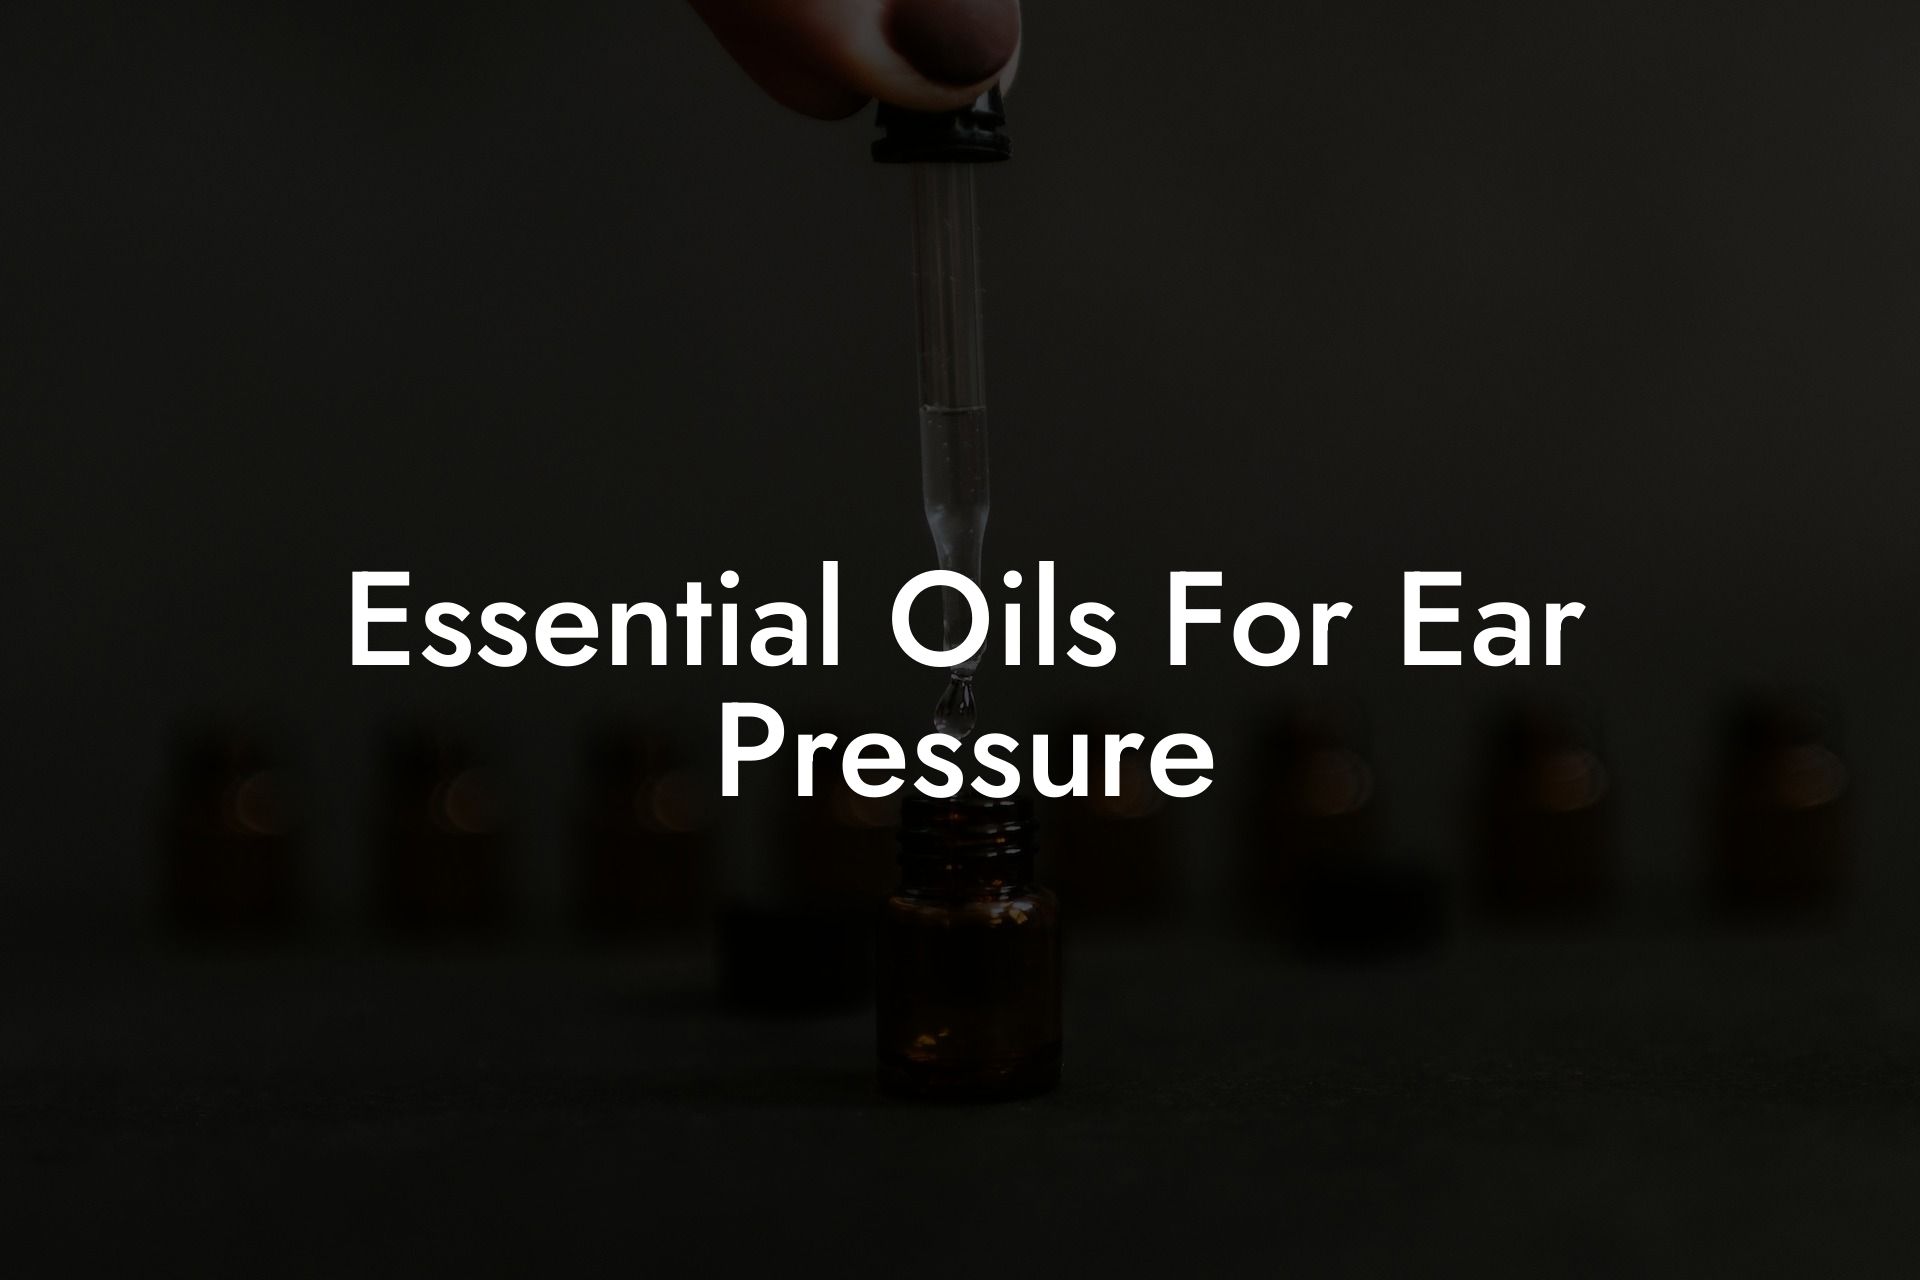 Essential Oils For Ear Pressure